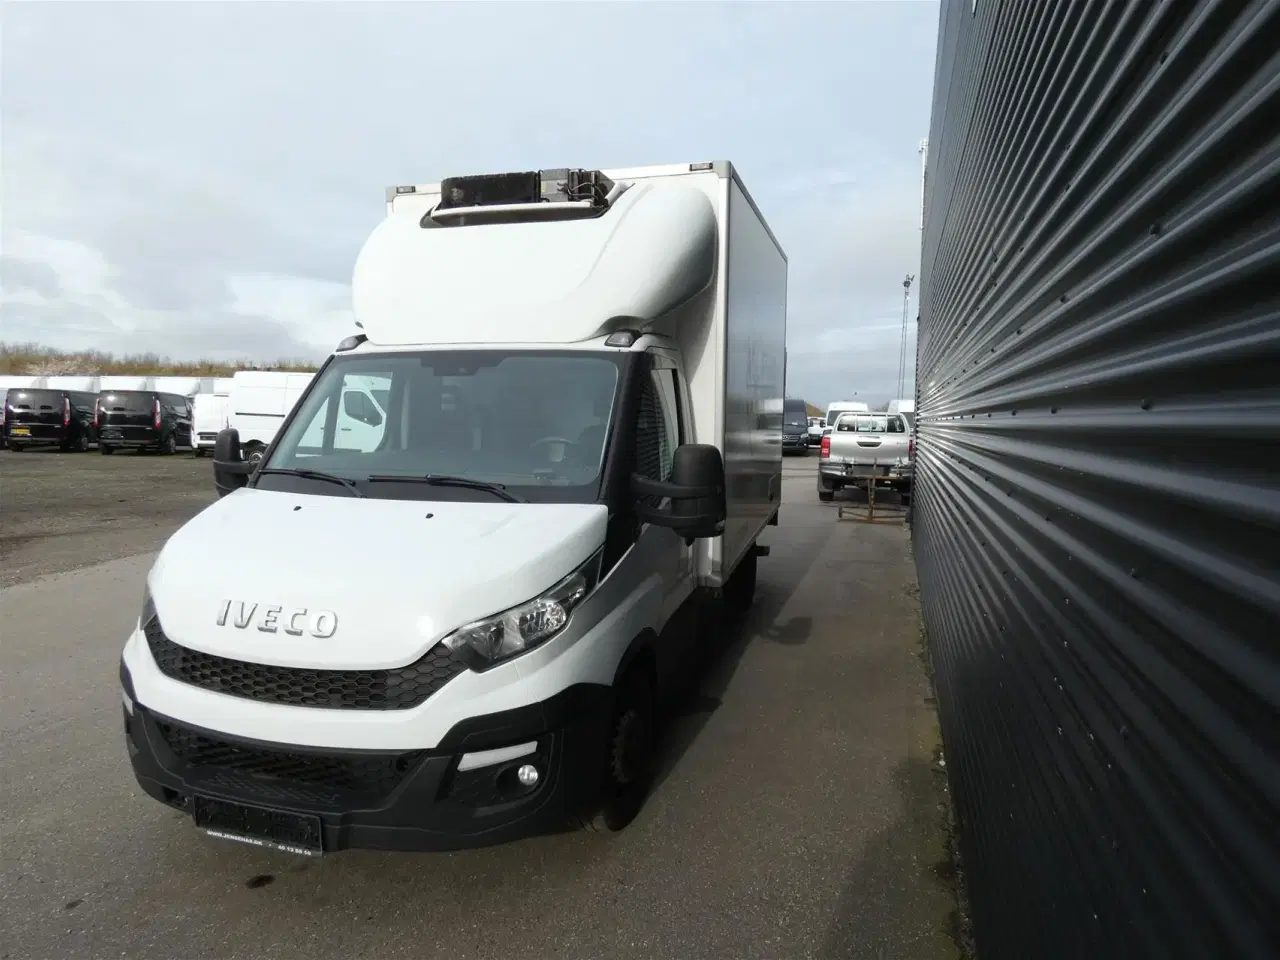 Billede 4 - Iveco Daily 35S17 3750mm 3,0 D 170HK Ladv./Chas. 6g